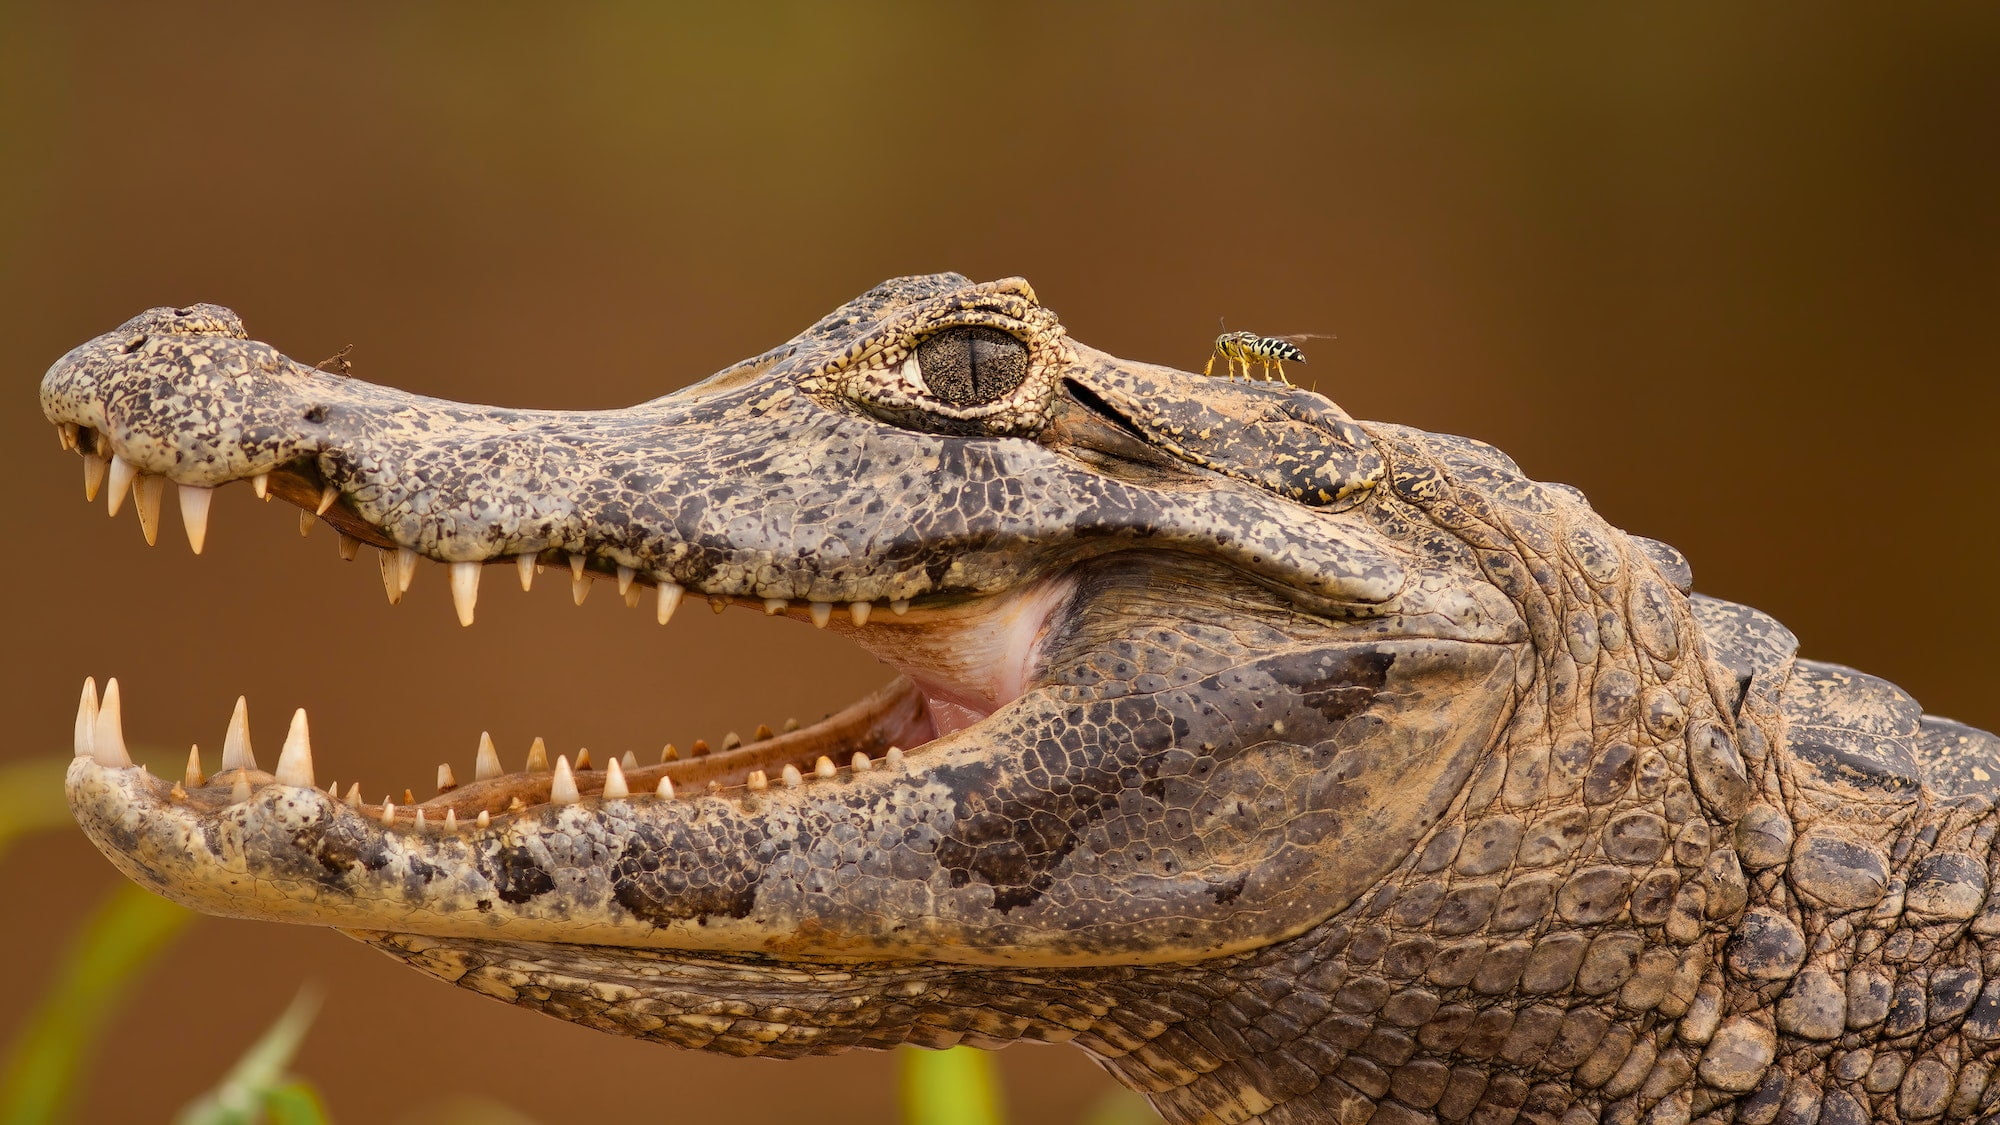 Head of yacare caiman with open mouth and visible teeth, Pantanal, Brasil